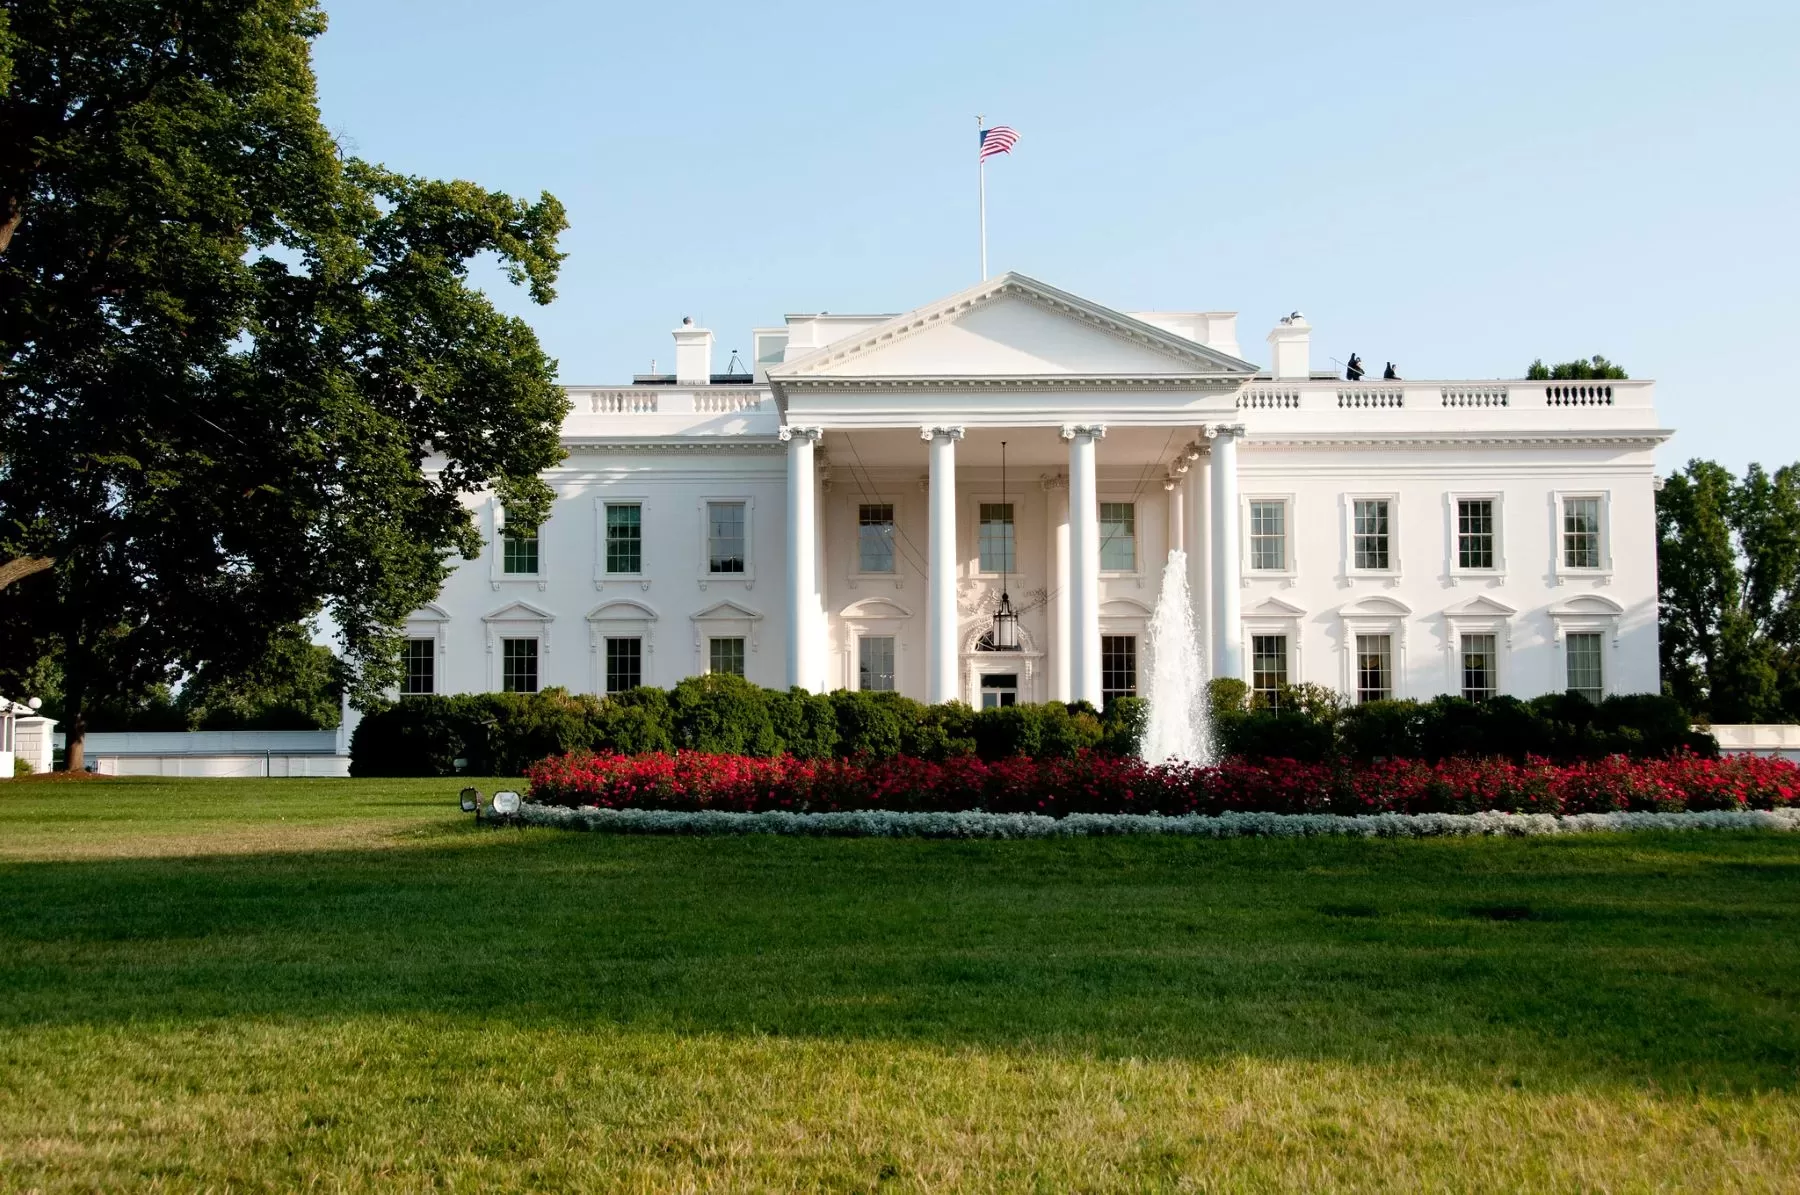 The Whitehouse, where US Secretaries of Agriculture work